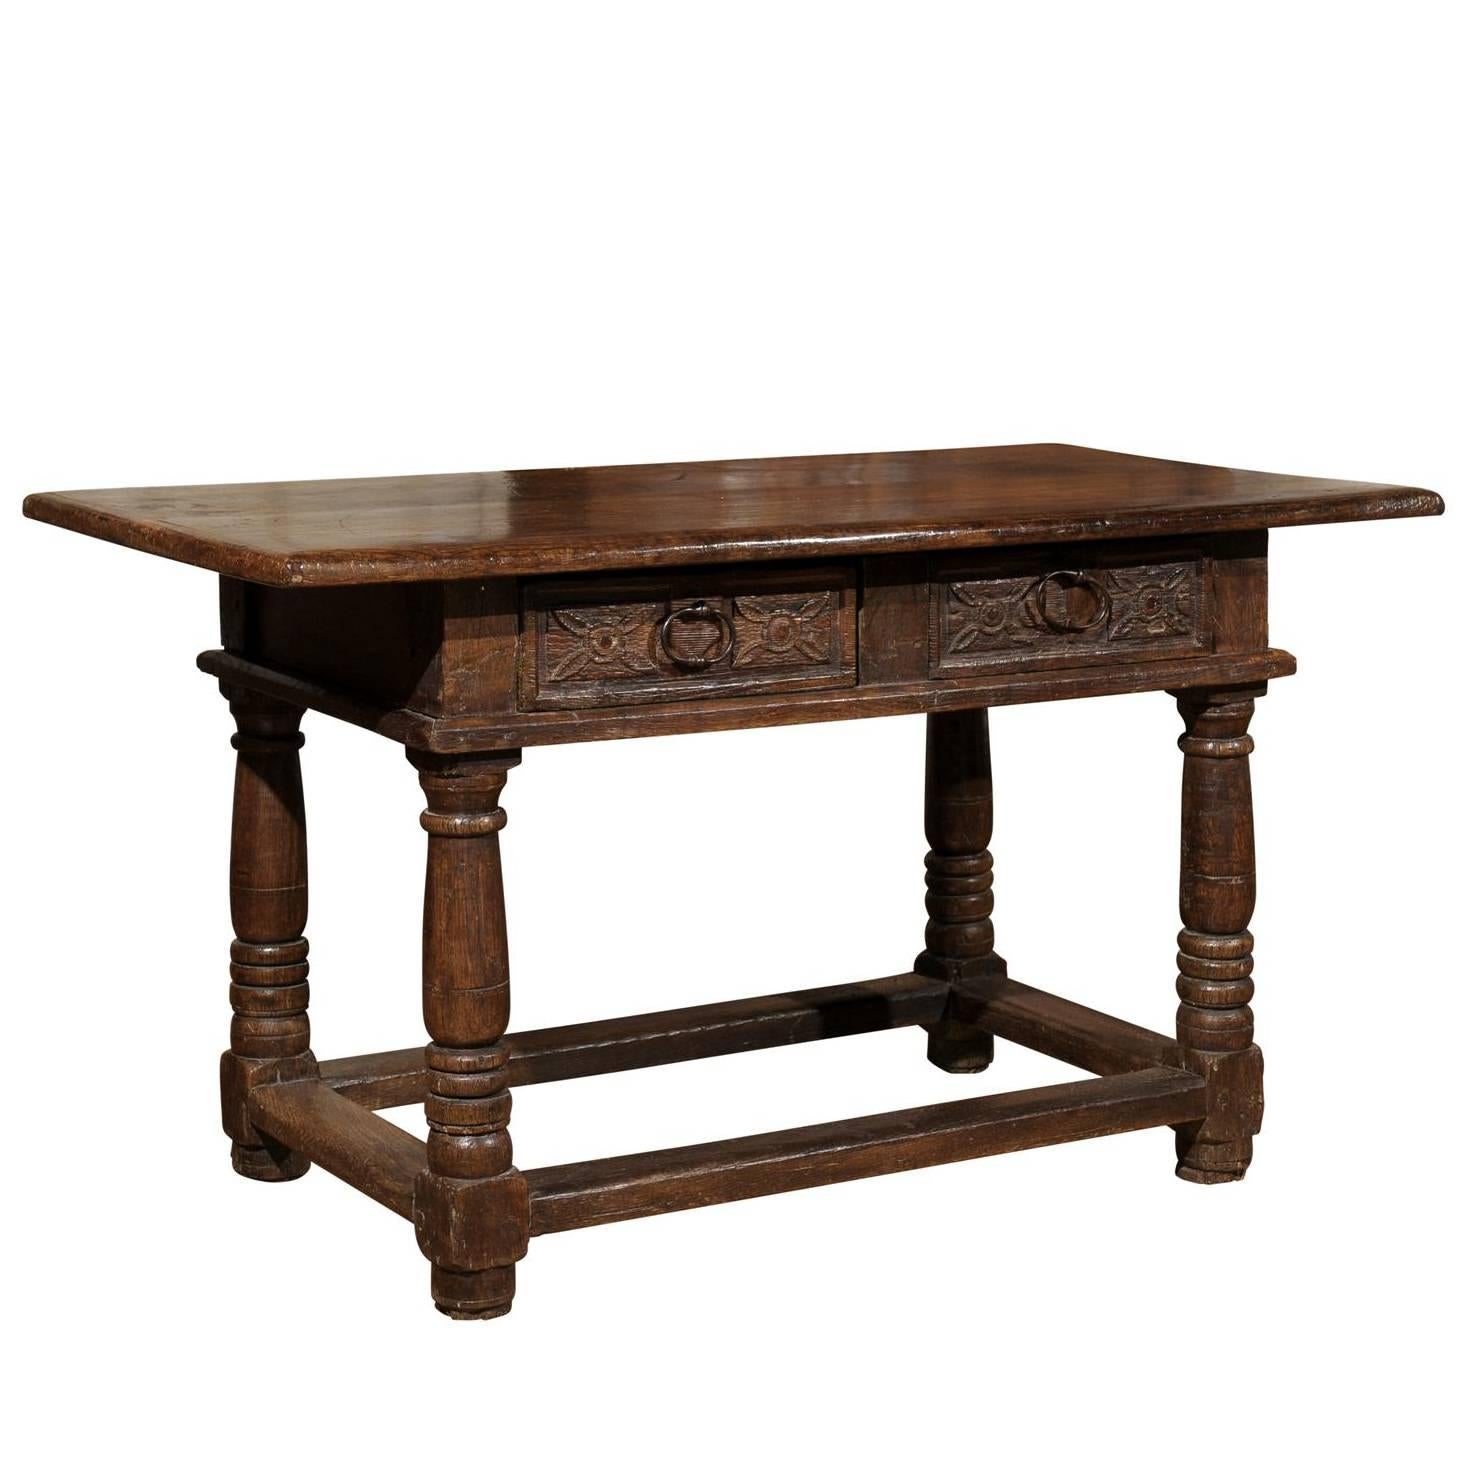 French 1750s Walnut Library Table with Carved Drawers and Original Hardware For Sale